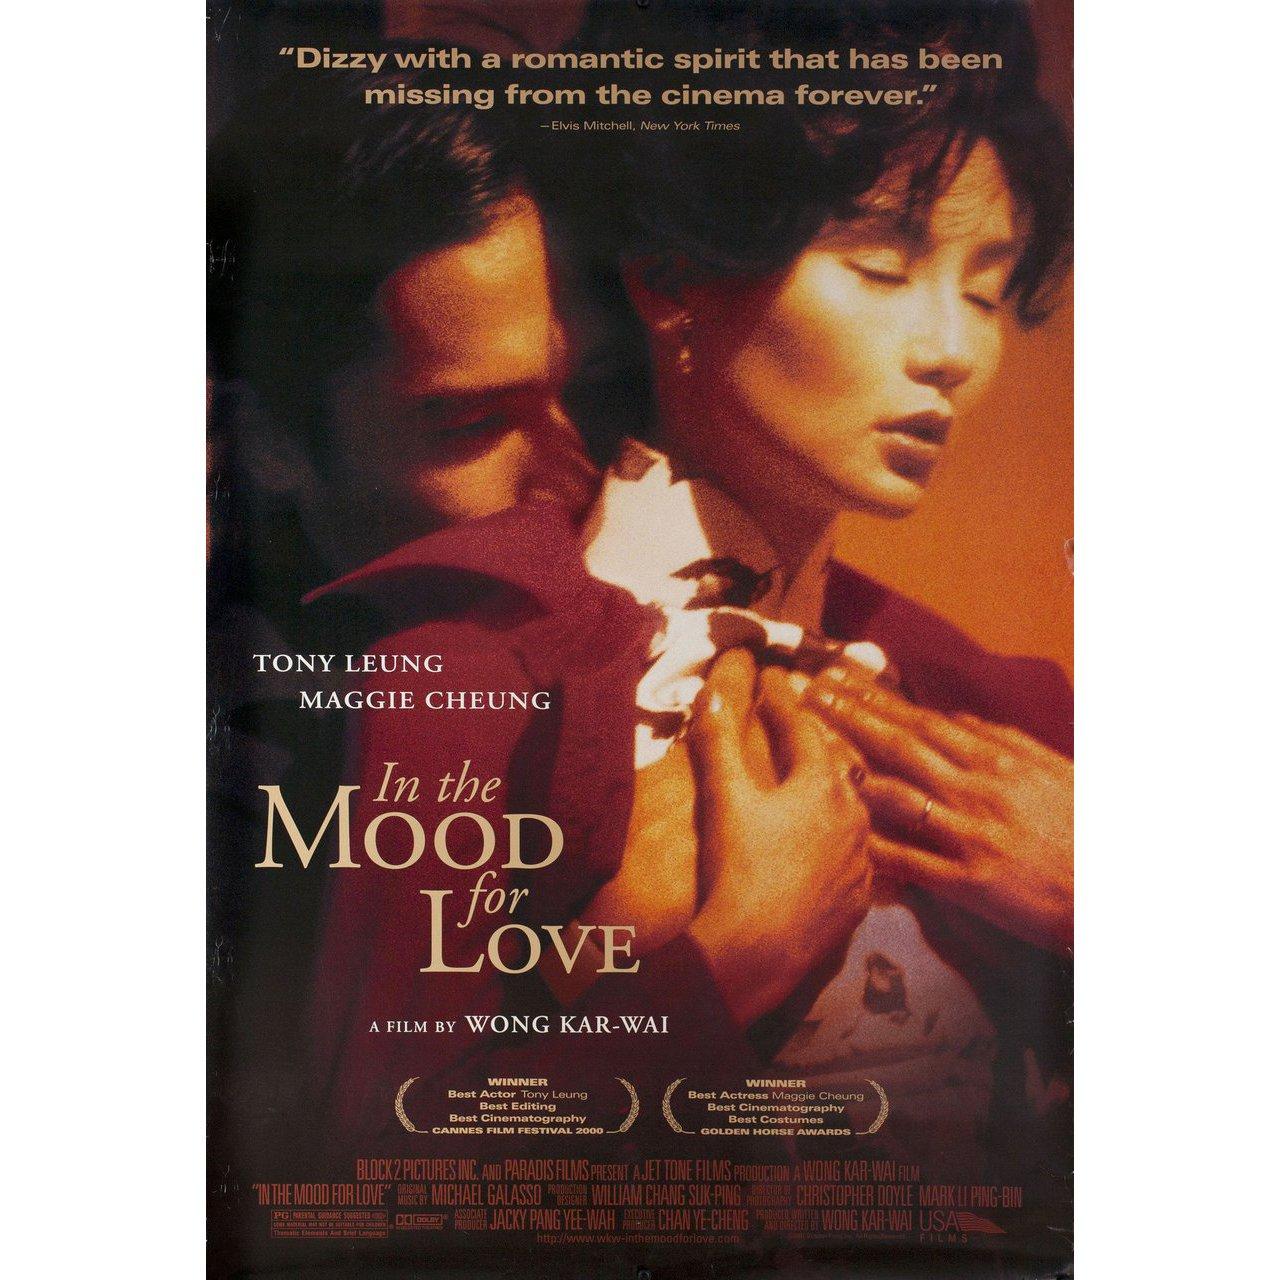 American In the Mood for Love 2000 U.S. One Sheet Film Poster